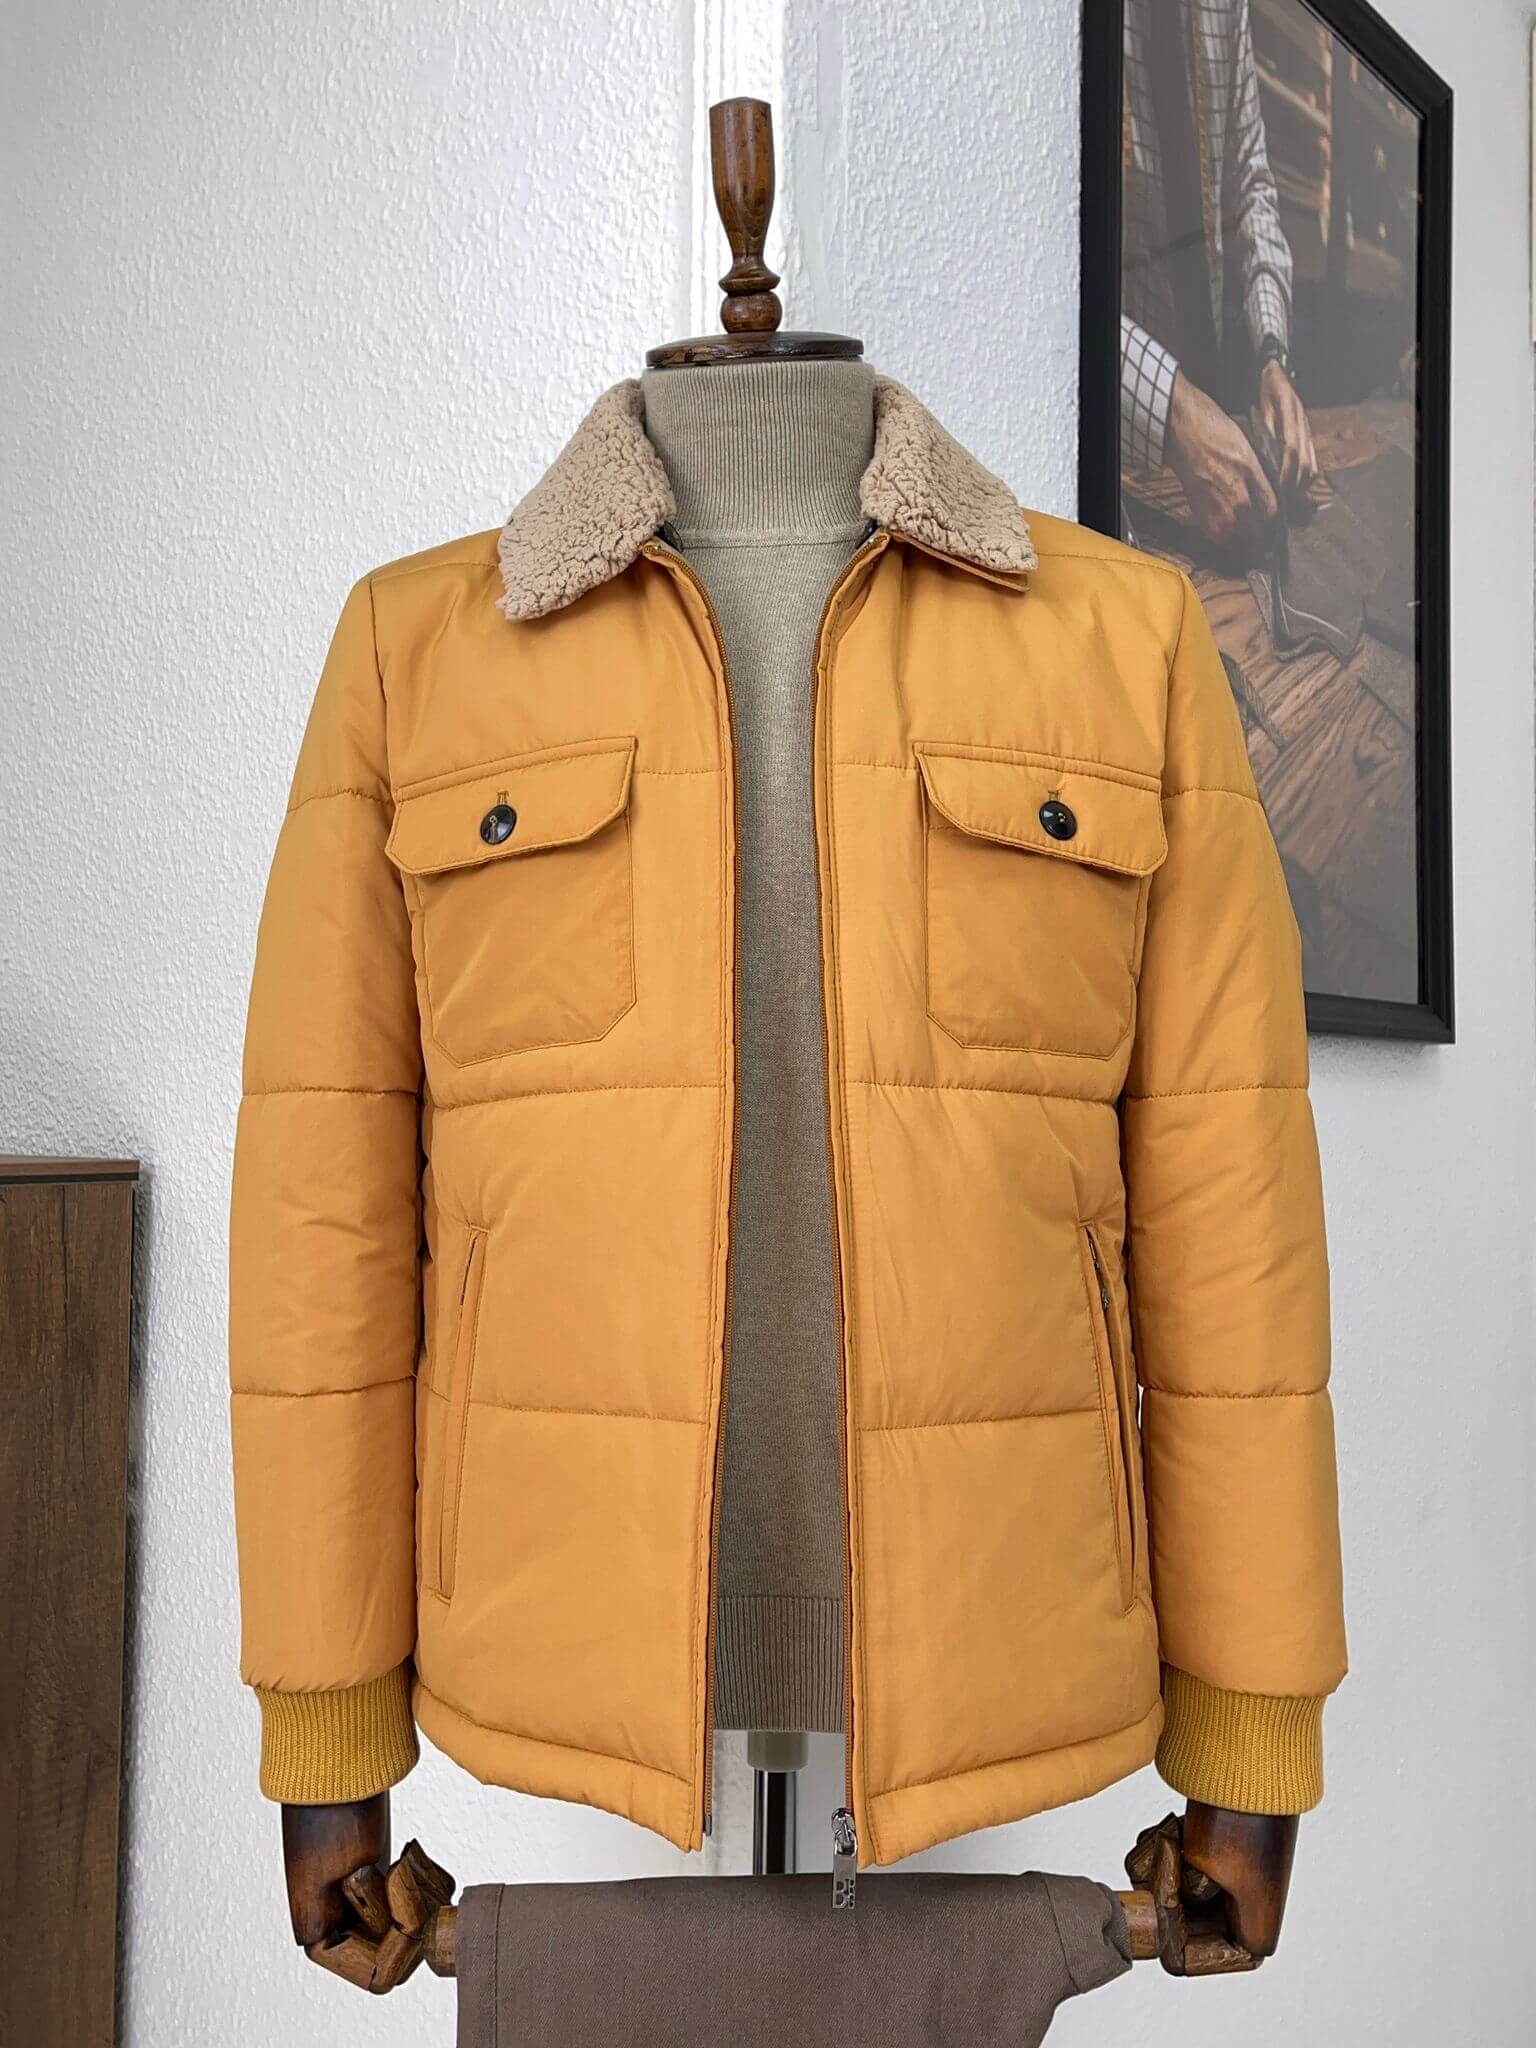 Slim fit yellow fur coat with a luxurious feel